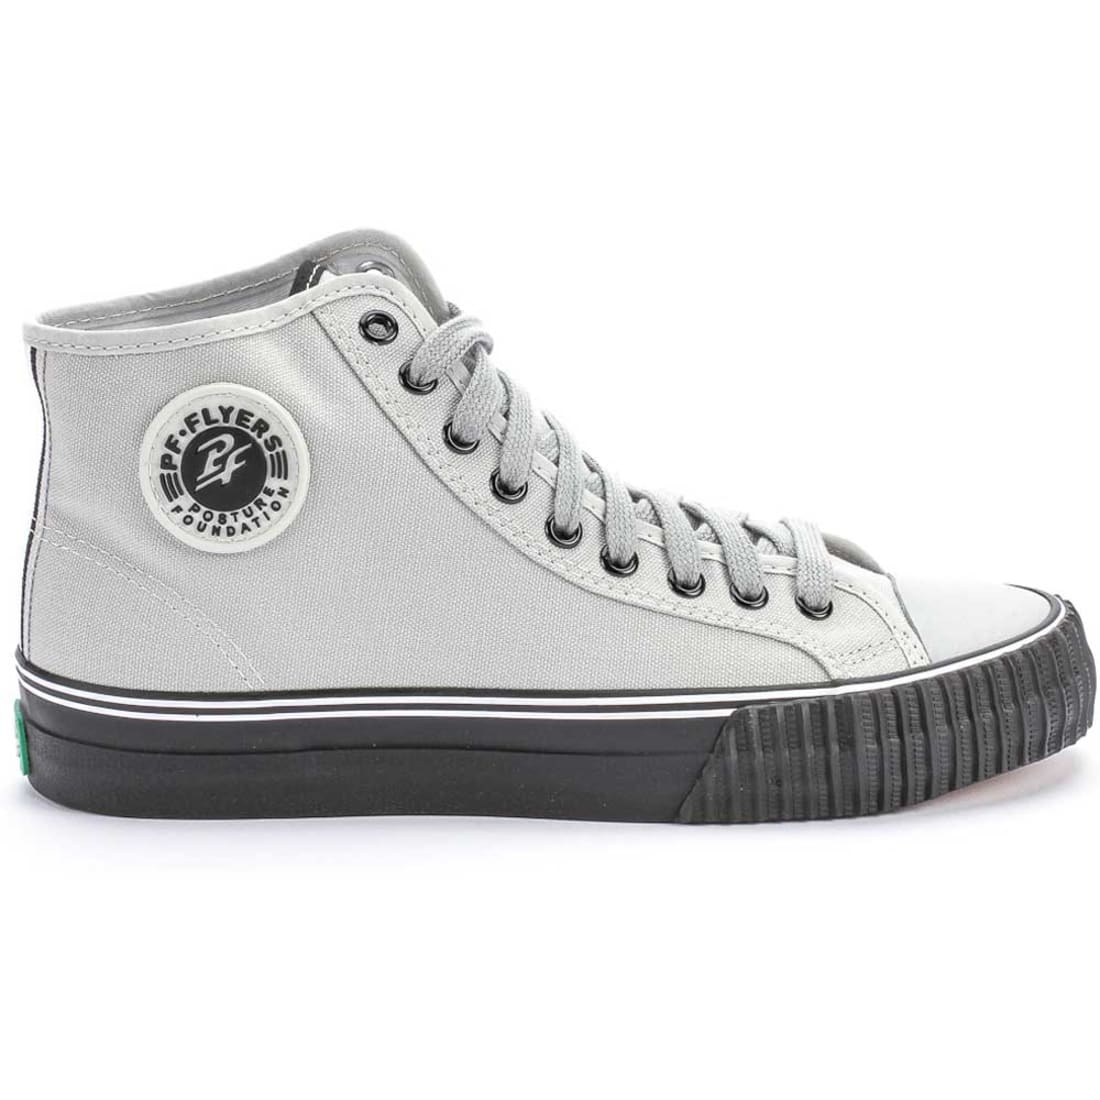 stores that sell pf flyers